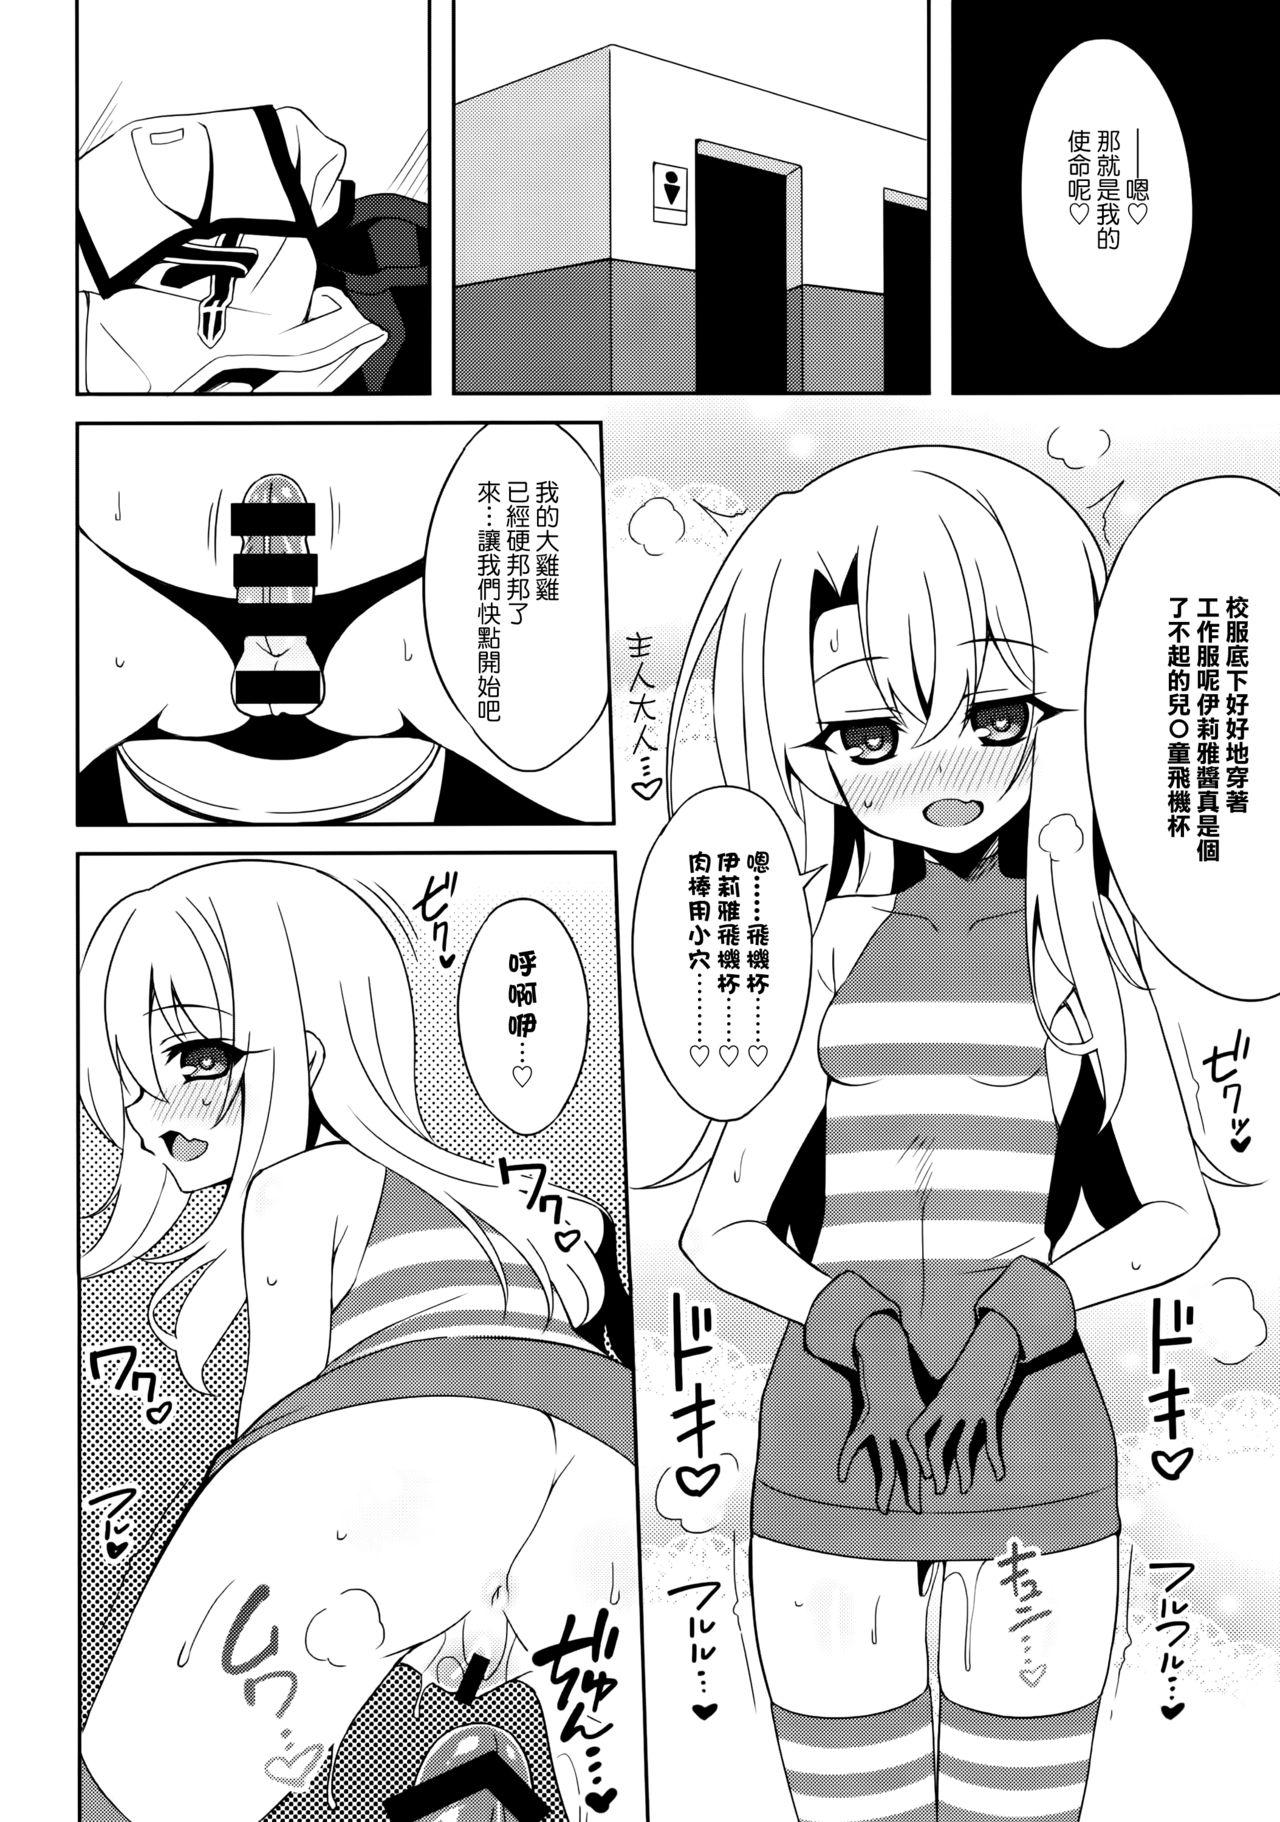 Lesbiansex Marunaho-chan Install - Fate kaleid liner prisma illya Ginger - Page 5